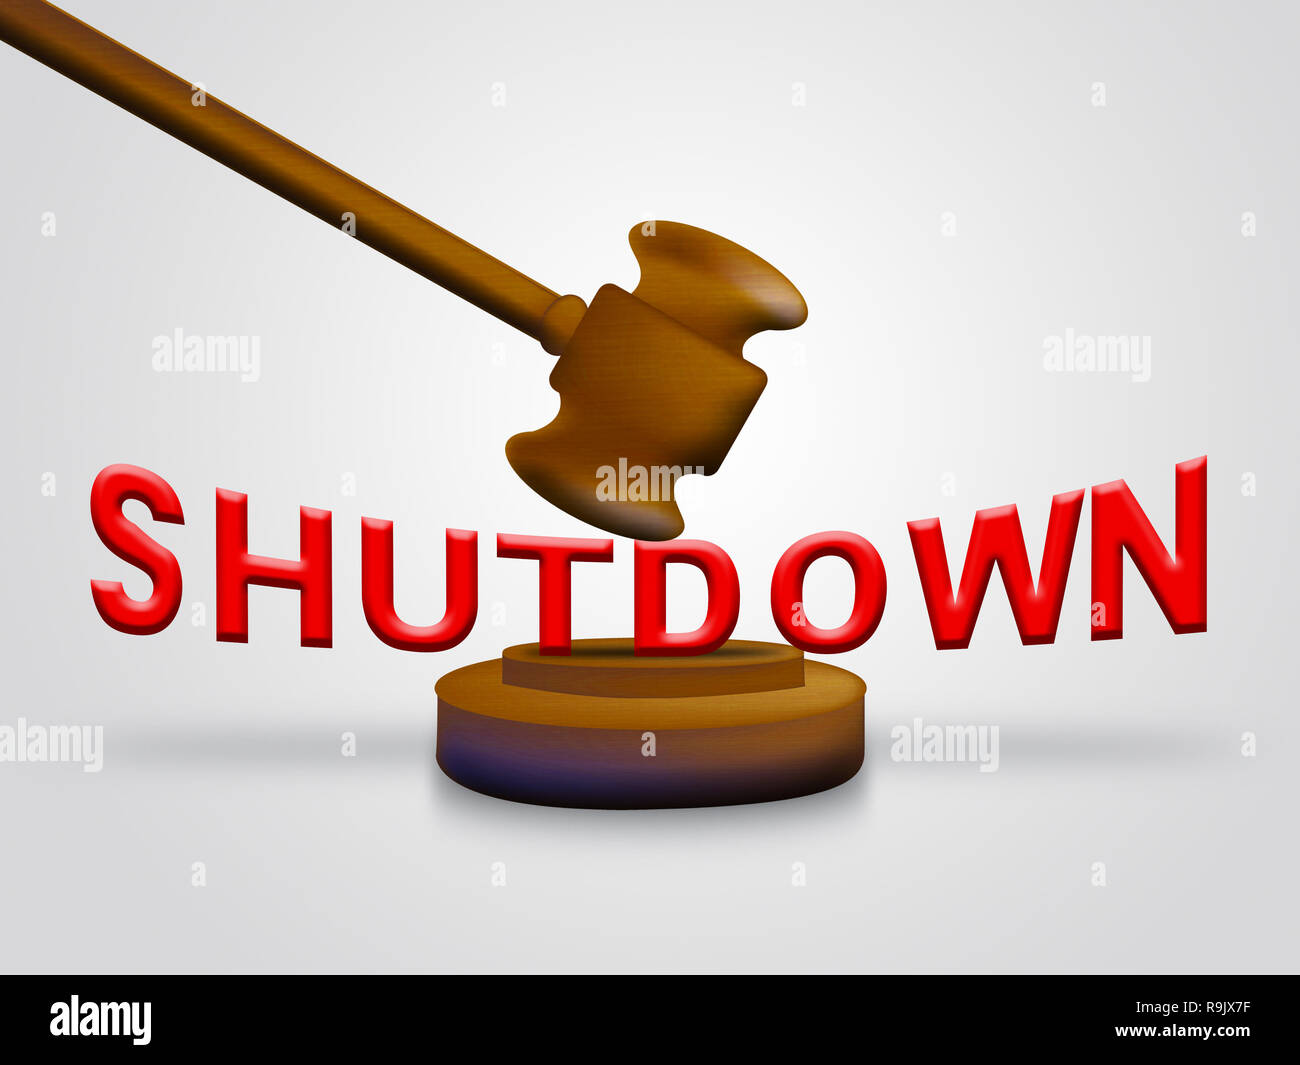 Government Shutdown Gavel Means America Closed By Senate Or President. Washington DC Closed United States Stock Photo